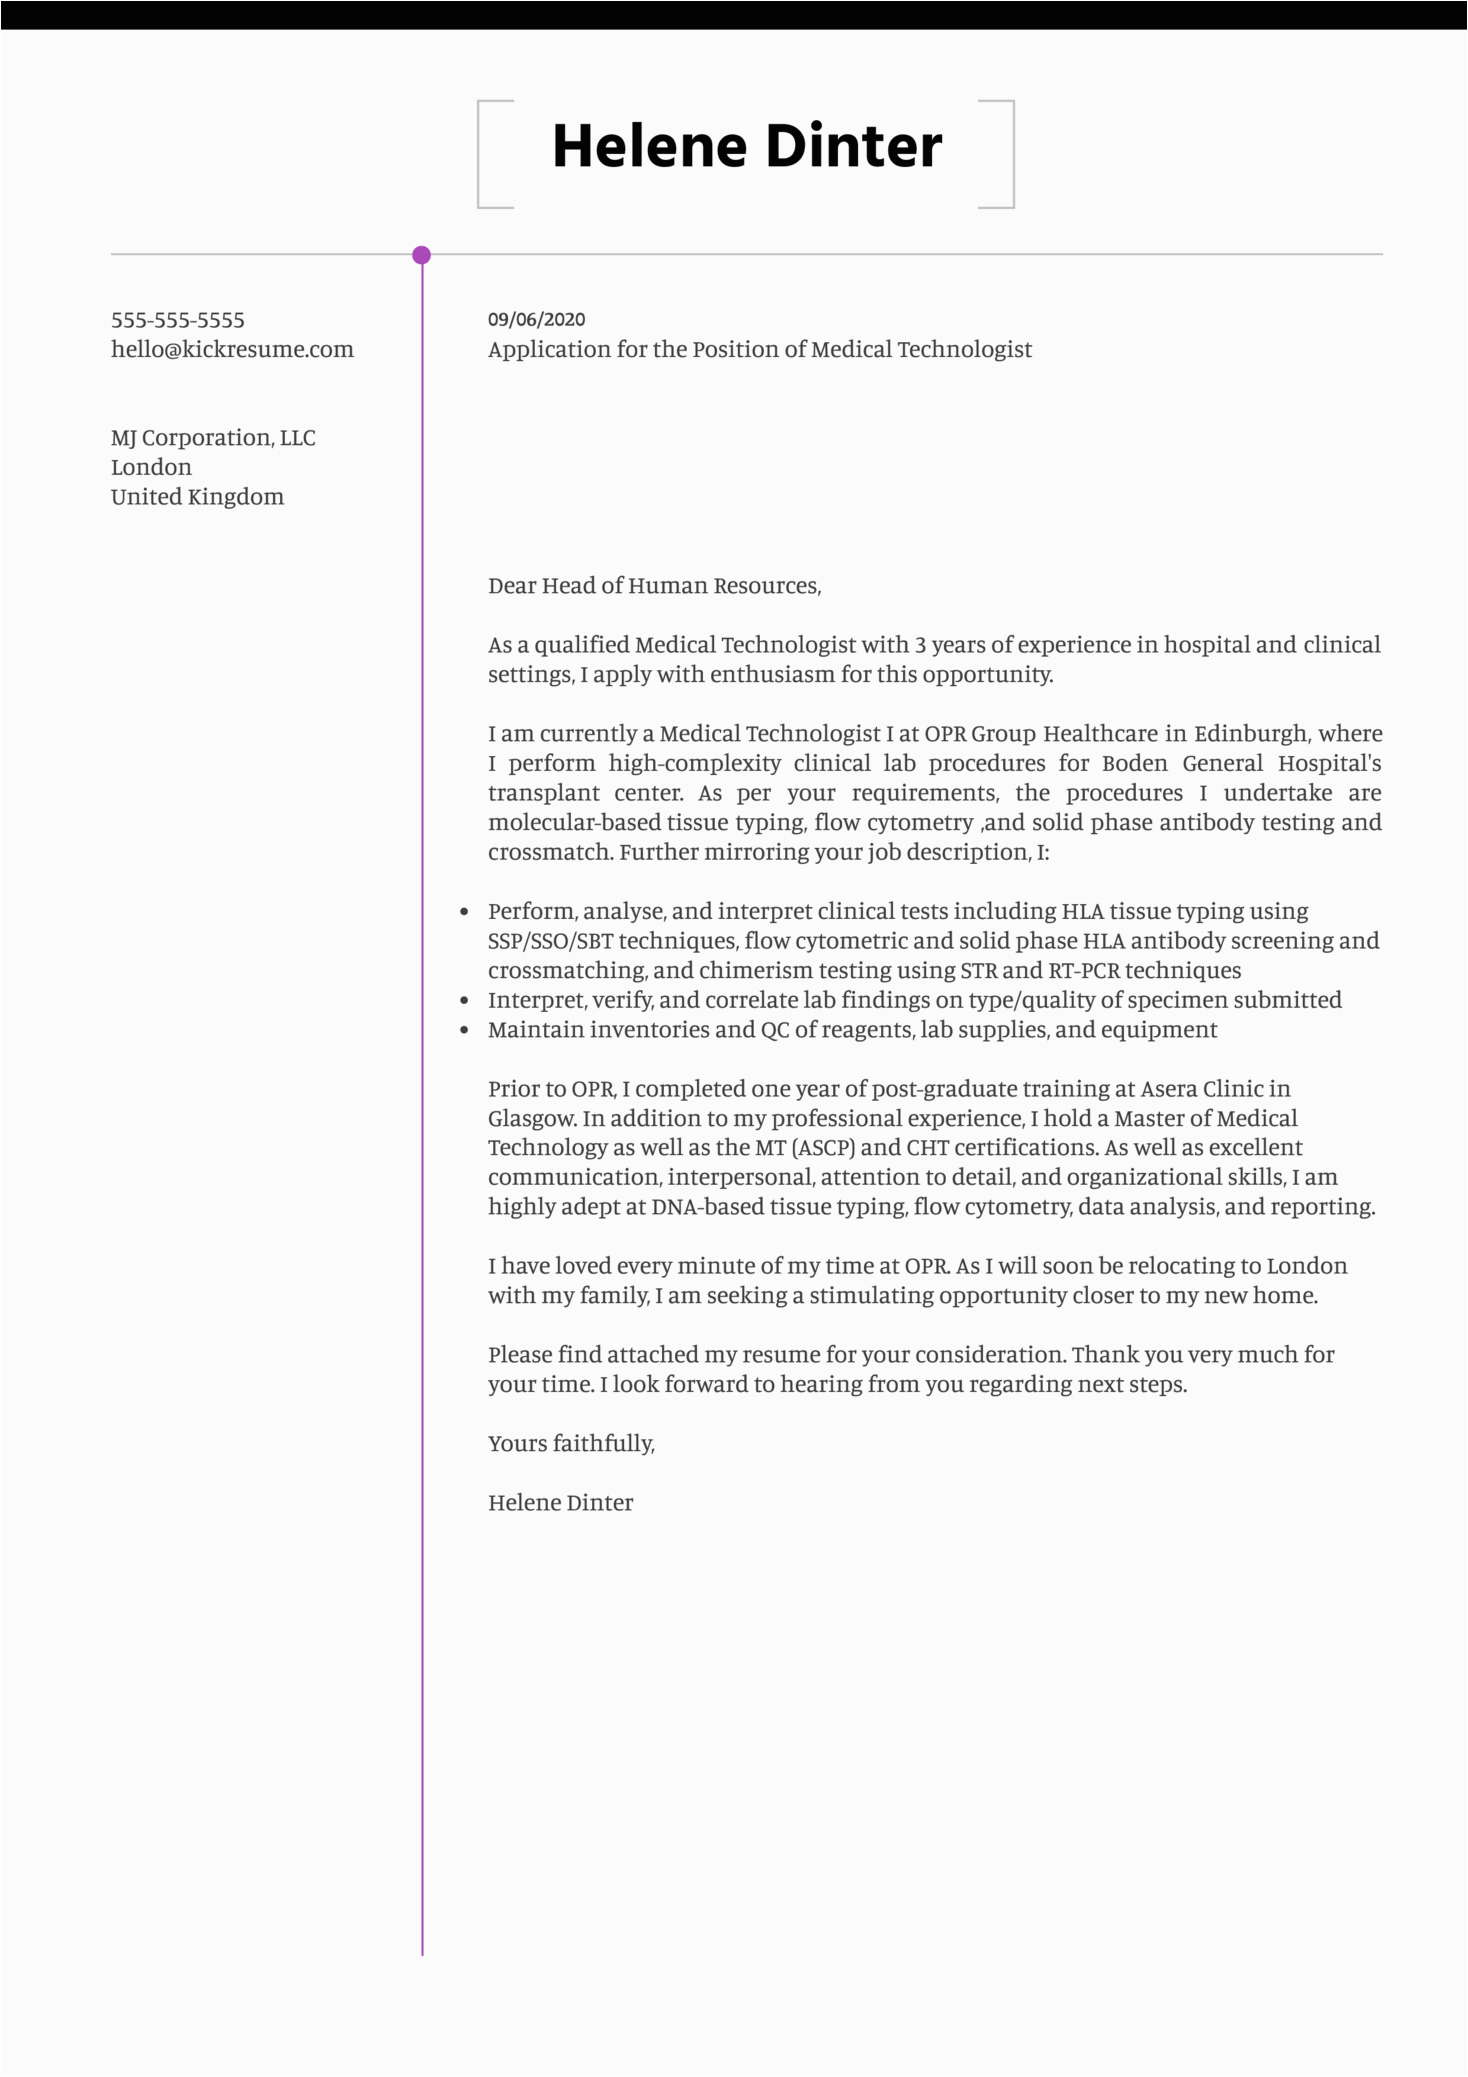 Medical Technologist Resume and Cover Letter Templates Medical Technologist Cover Letter Example